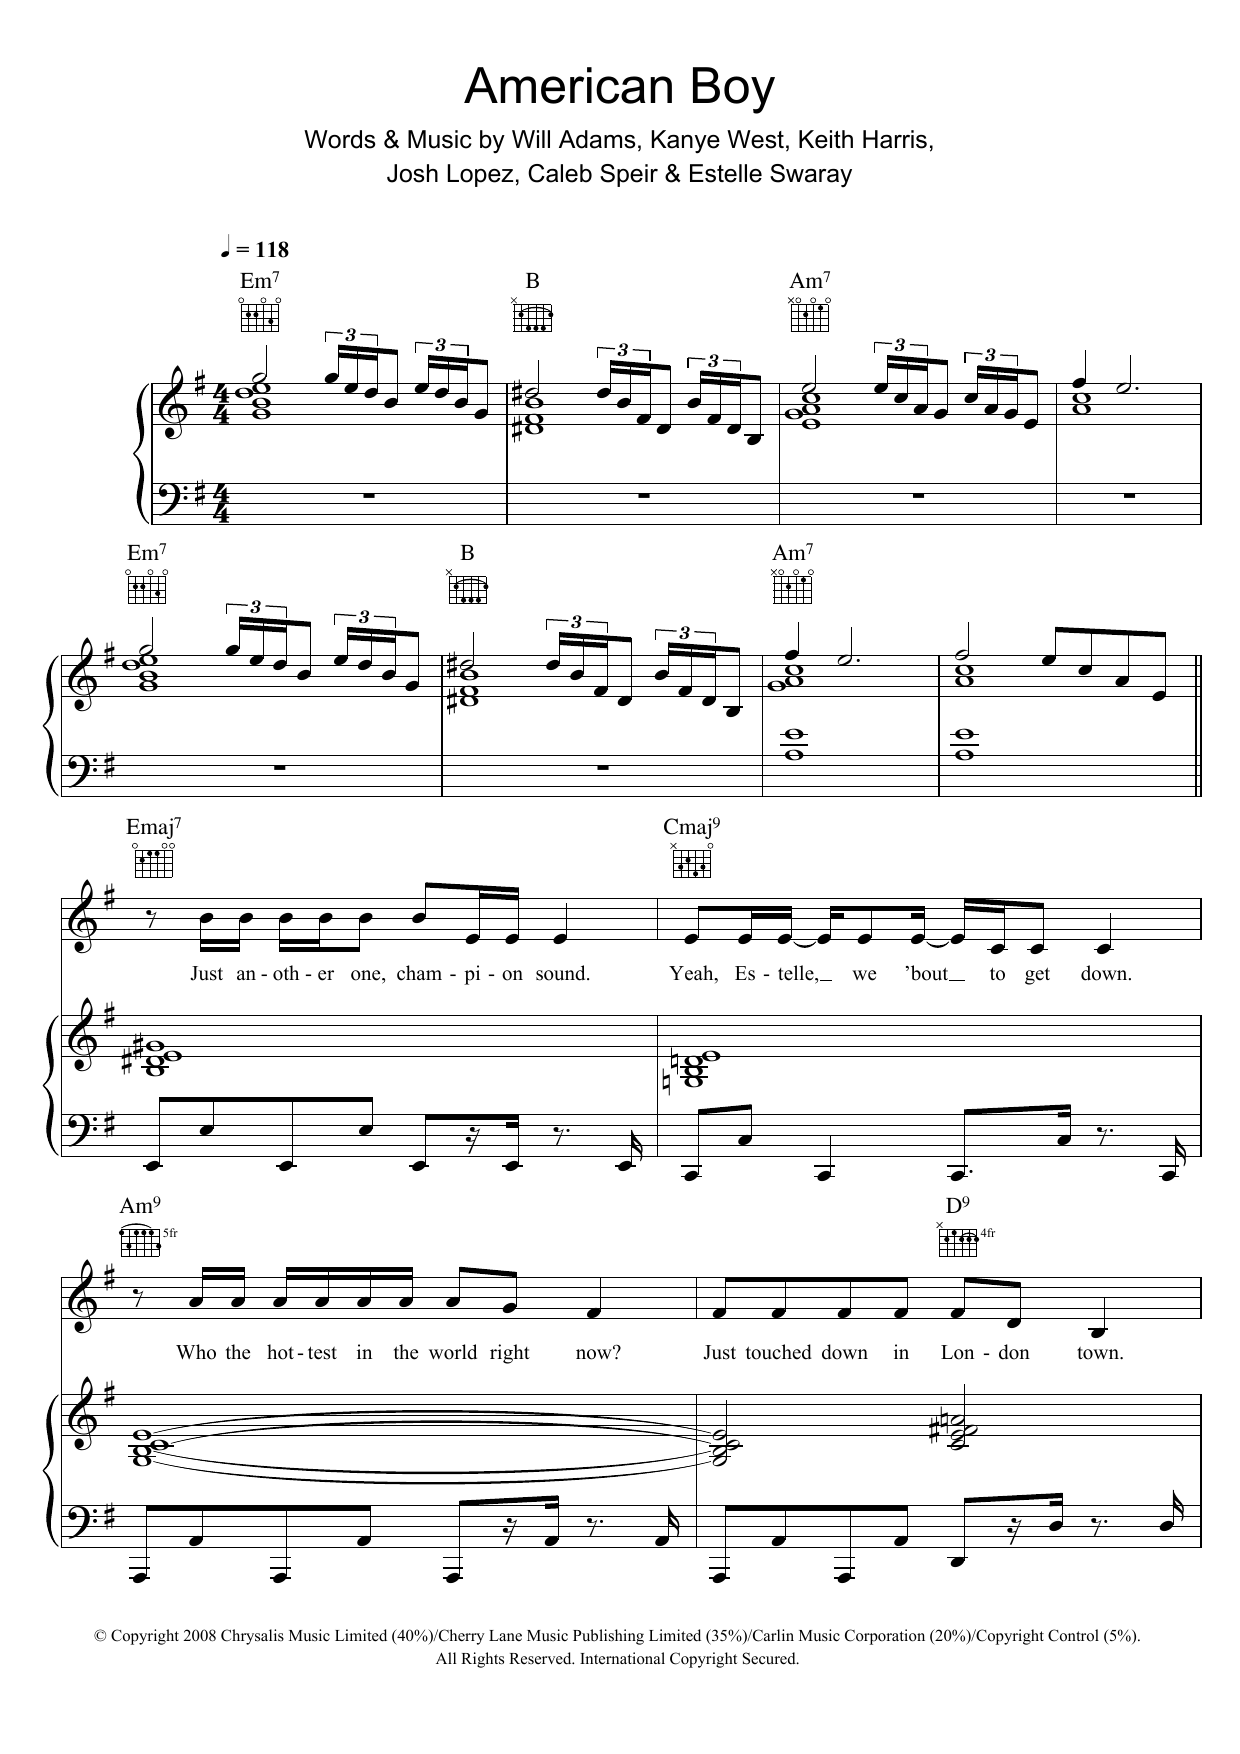 Estelle American Boy (feat. Kanye West) sheet music notes and chords. Download Printable PDF.